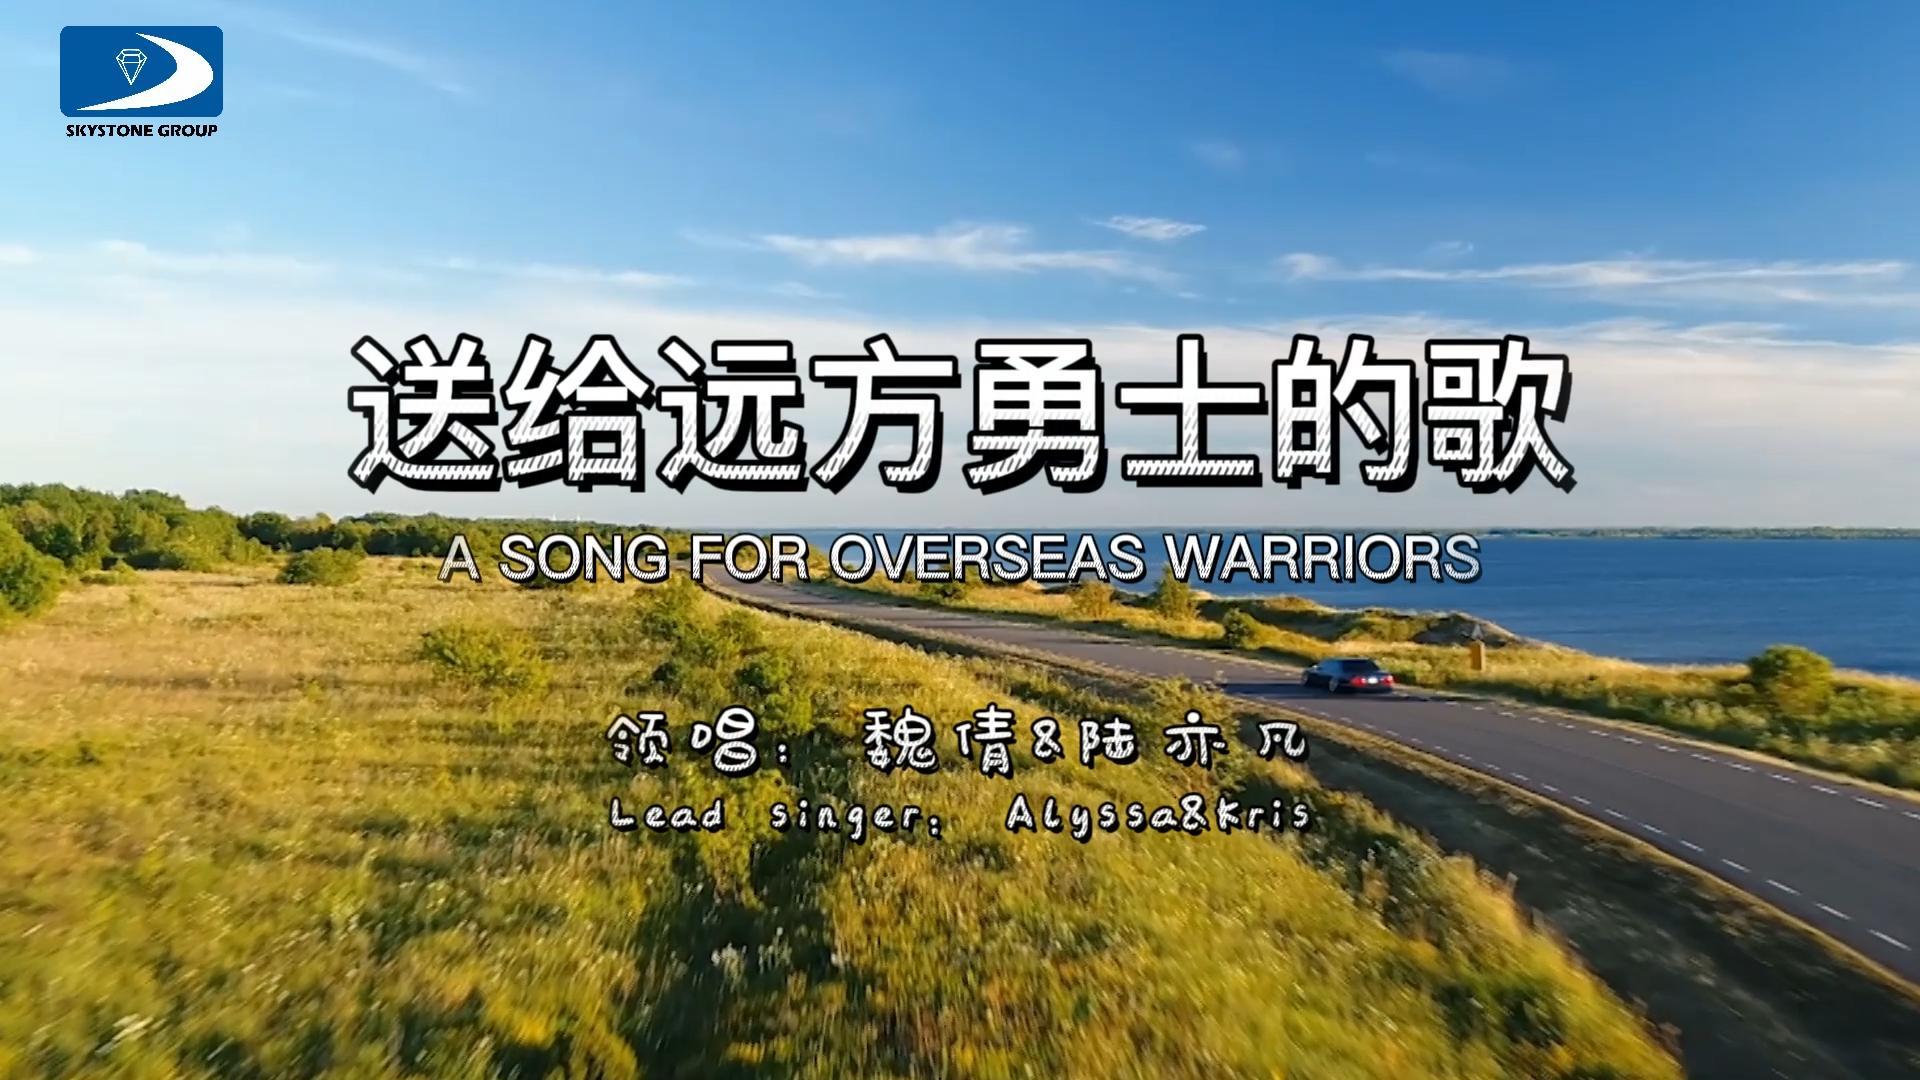 A song for overseas warriors